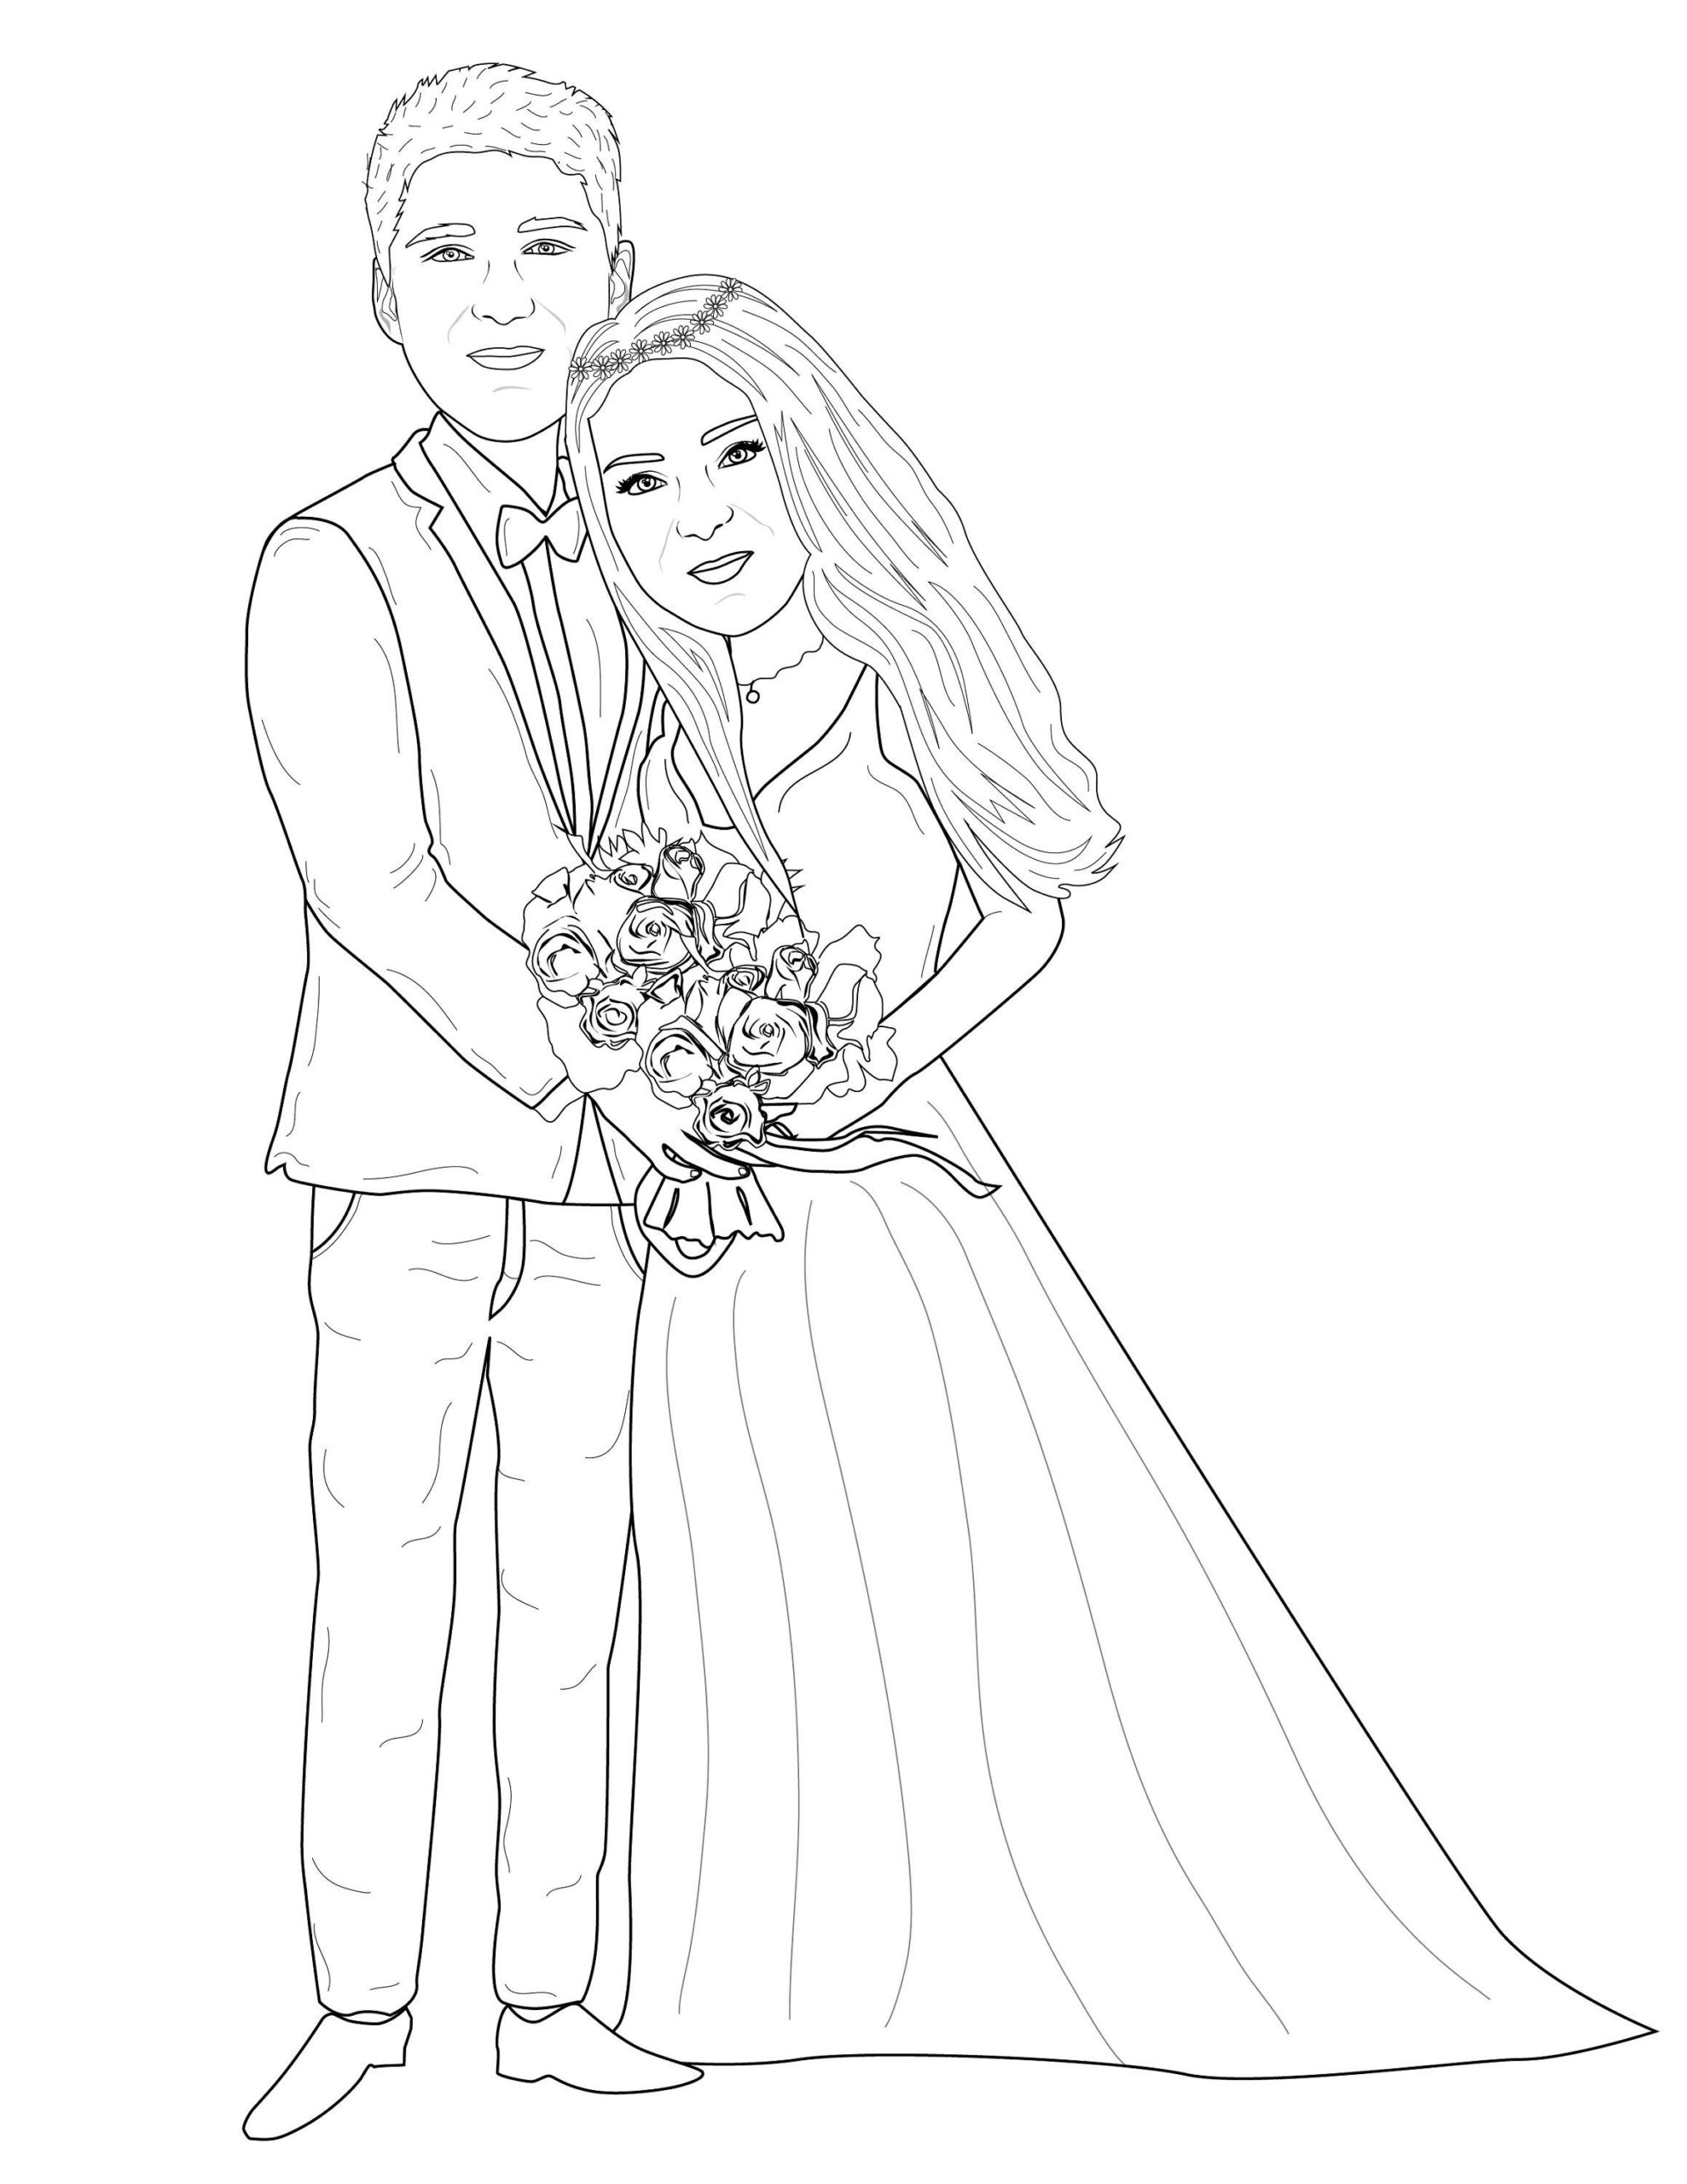 Coloring Pages : Custom Wedding Coloring Couple From Personalized ...